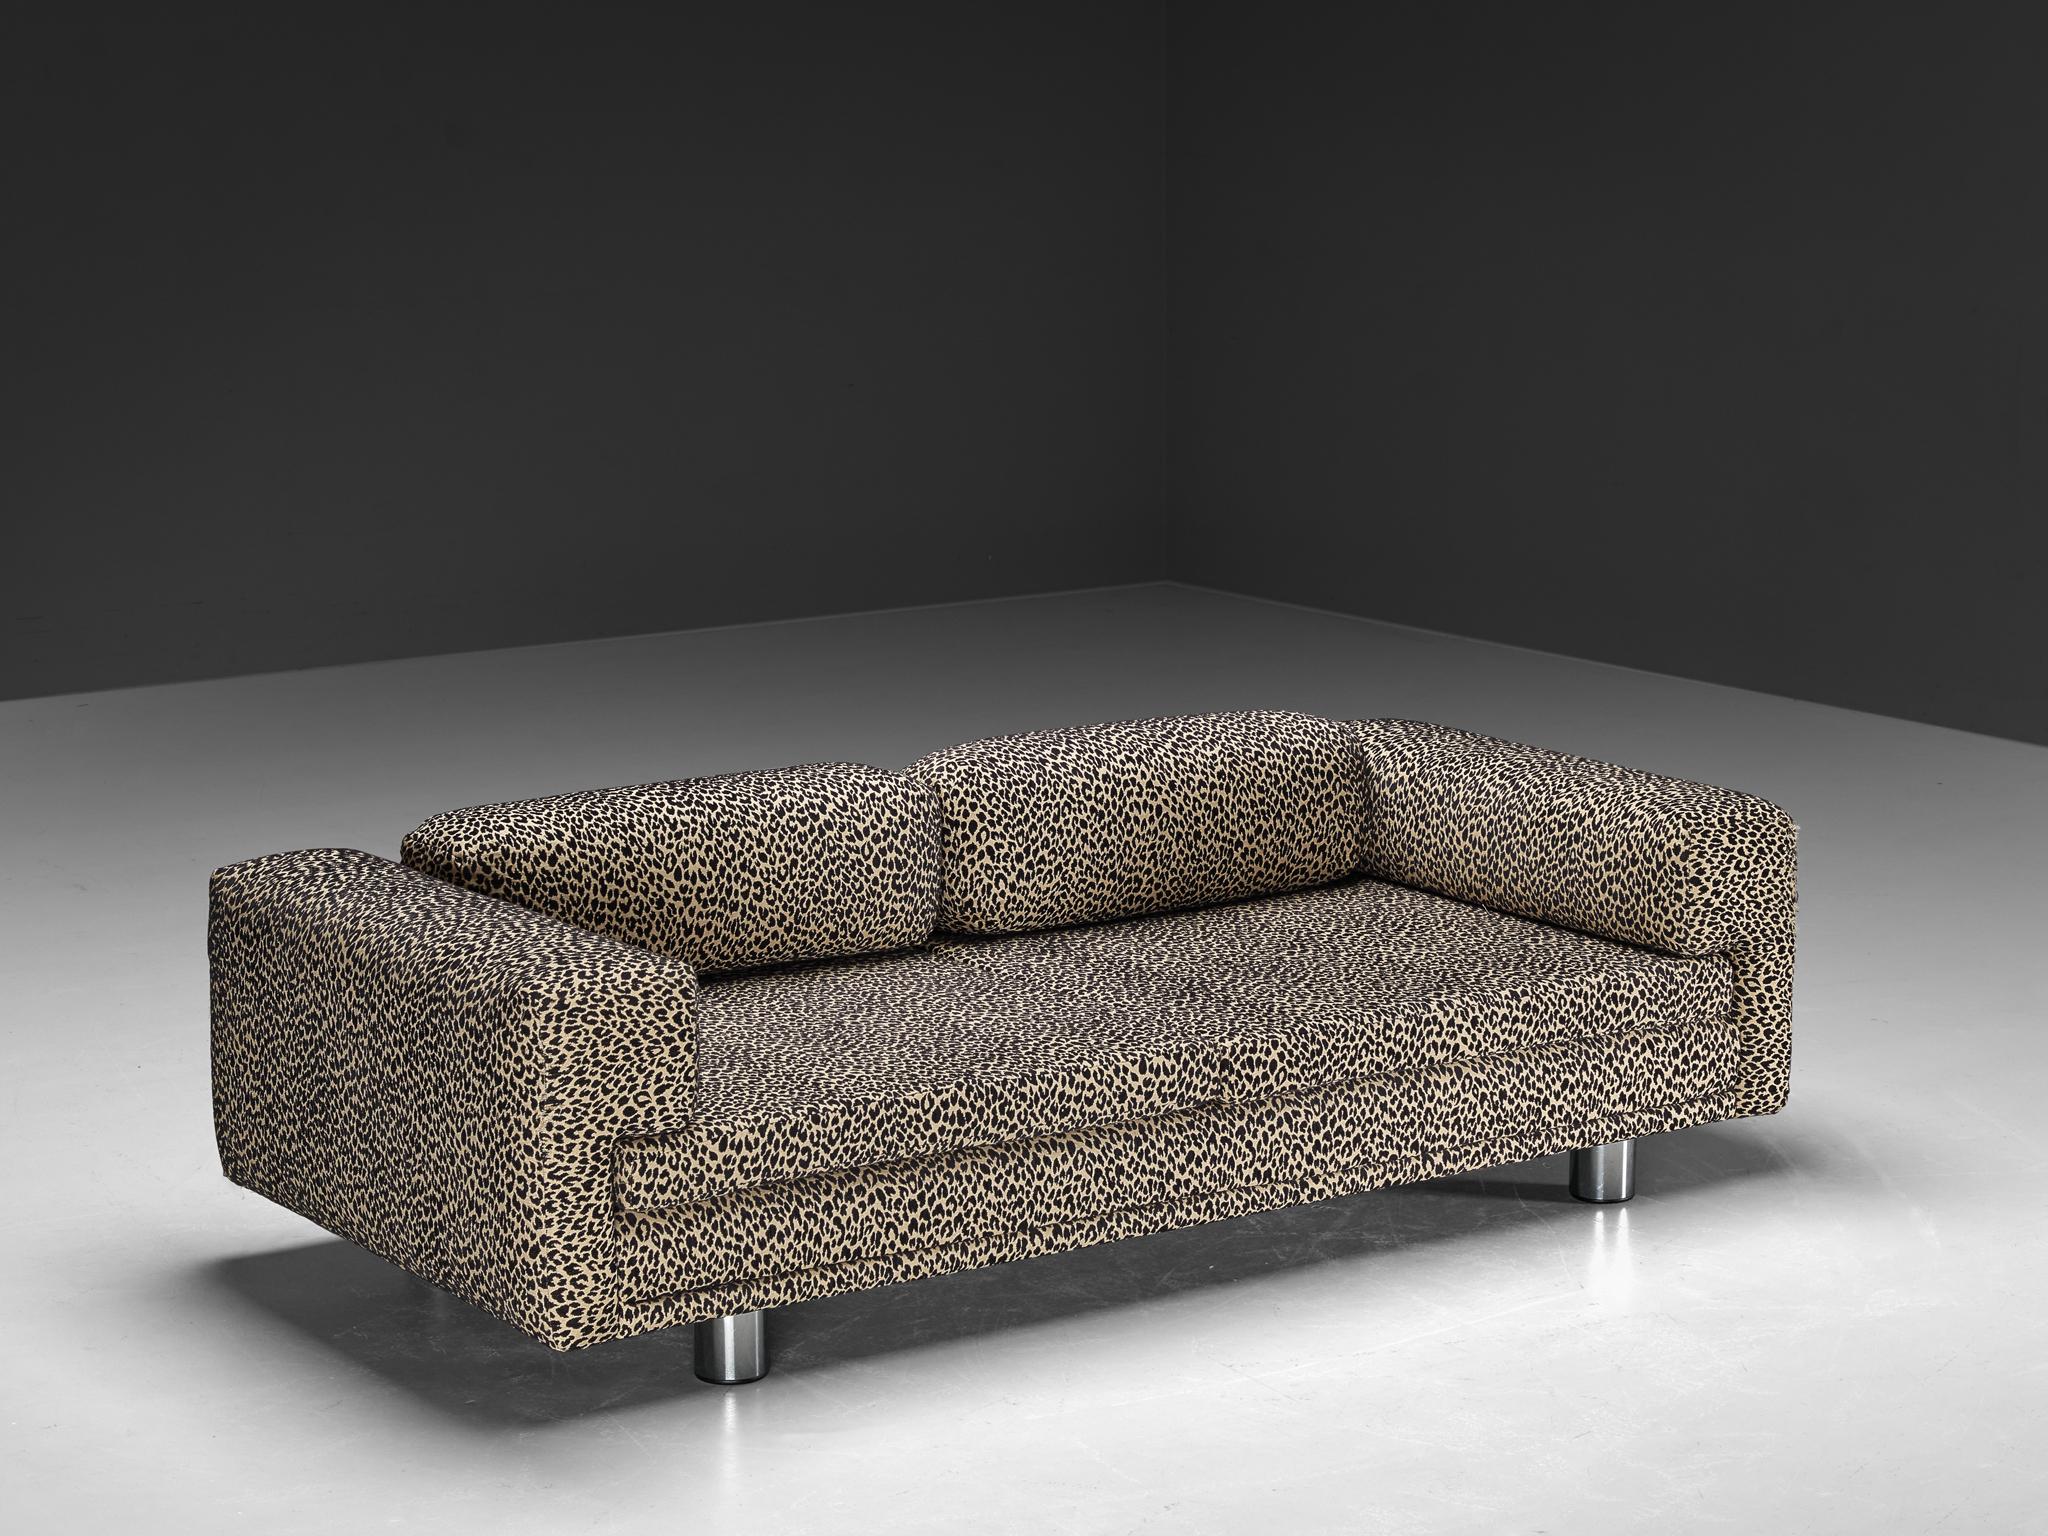 Howard Keith for HK Furniture, 'Diplomat' sofa, fabric, chrome-plated steel, United Kingdom, 1970s

The 'Diplomat' sofa, with its voluptuous design, stands as a timeless symbol for design excellence. The bold combination of black and beige leopard